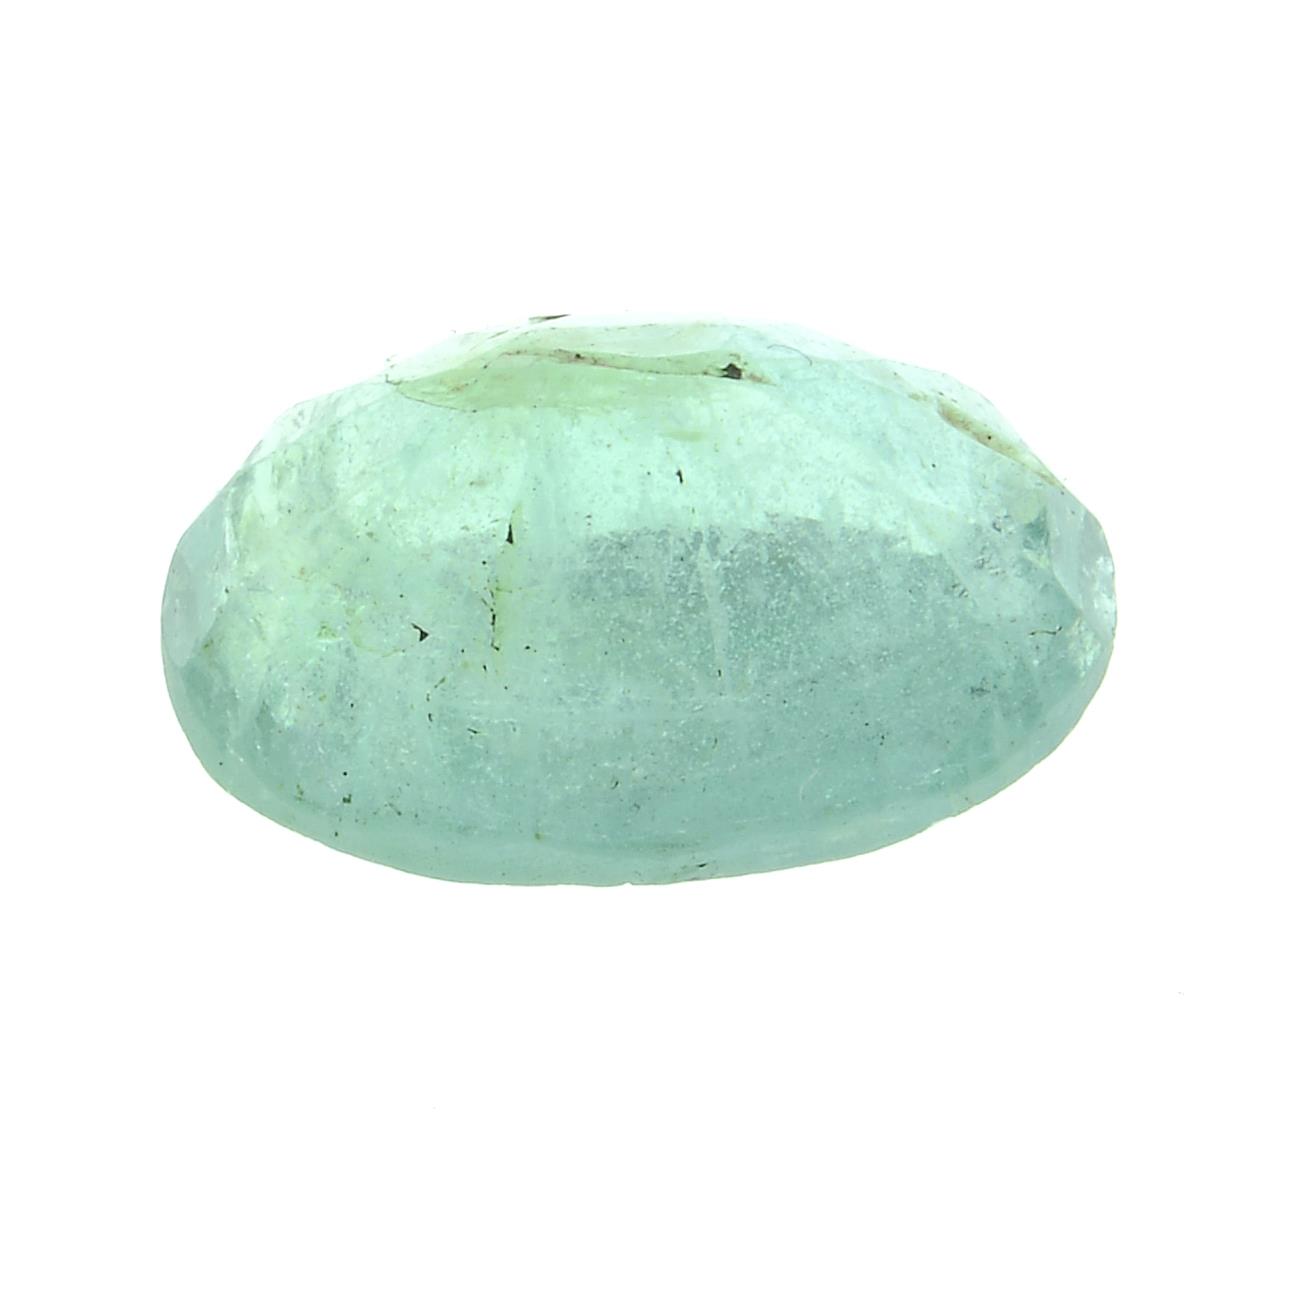 An oval shape emerald weighing 2.28ct within security seal. - Image 2 of 3